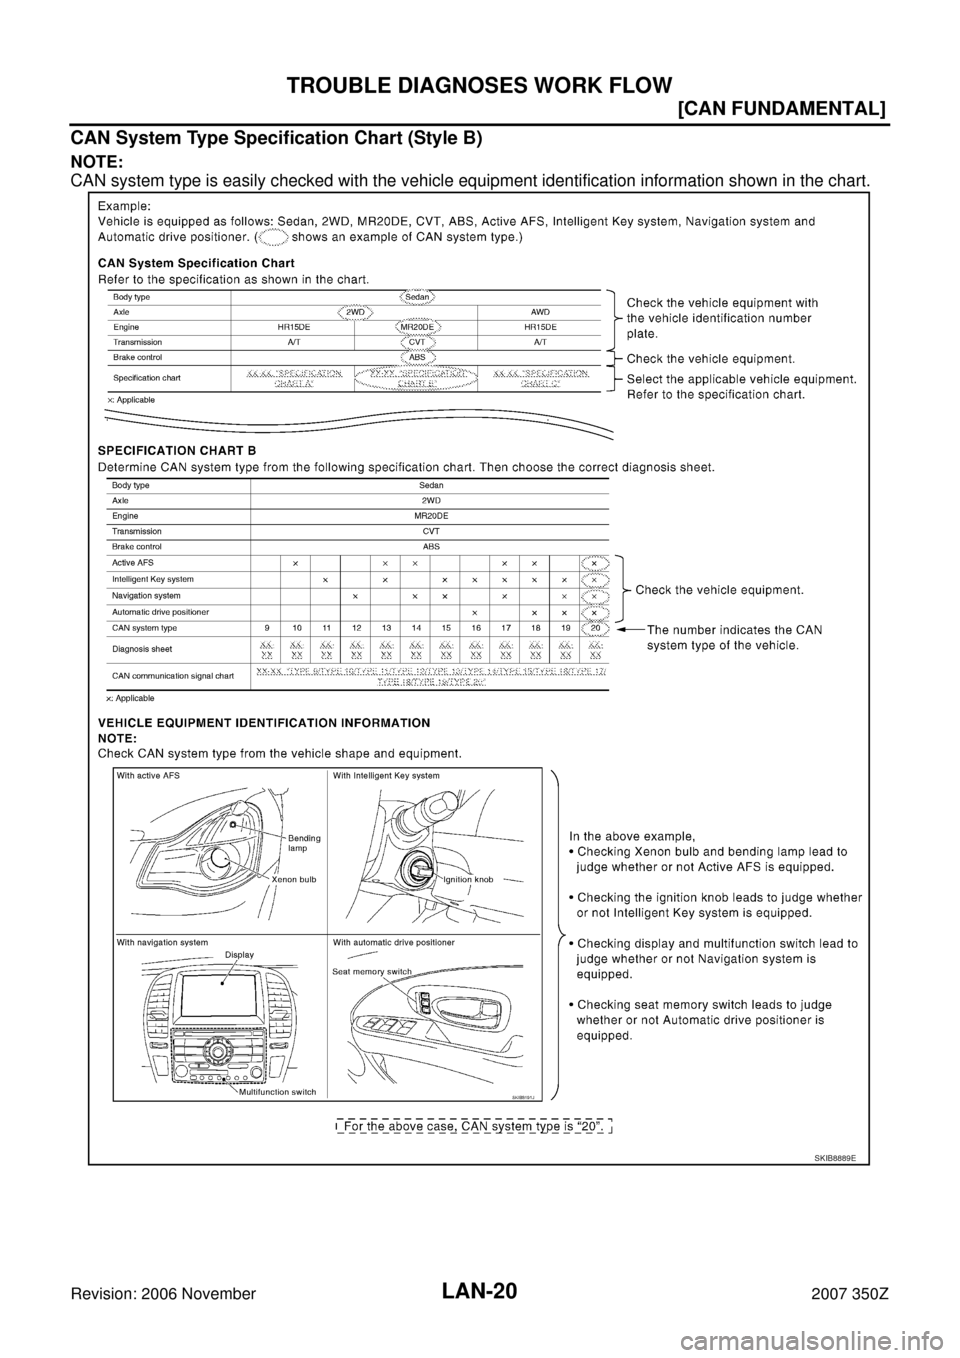 NISSAN 350Z 2007 Z33 LAN System User Guide LAN-20
[CAN FUNDAMENTAL]
TROUBLE DIAGNOSES WORK FLOW
Revision: 2006 November2007 350Z
CAN System Type Specification Chart (Style B)
NOTE:
CAN system type is easily checked with the vehicle equipment i